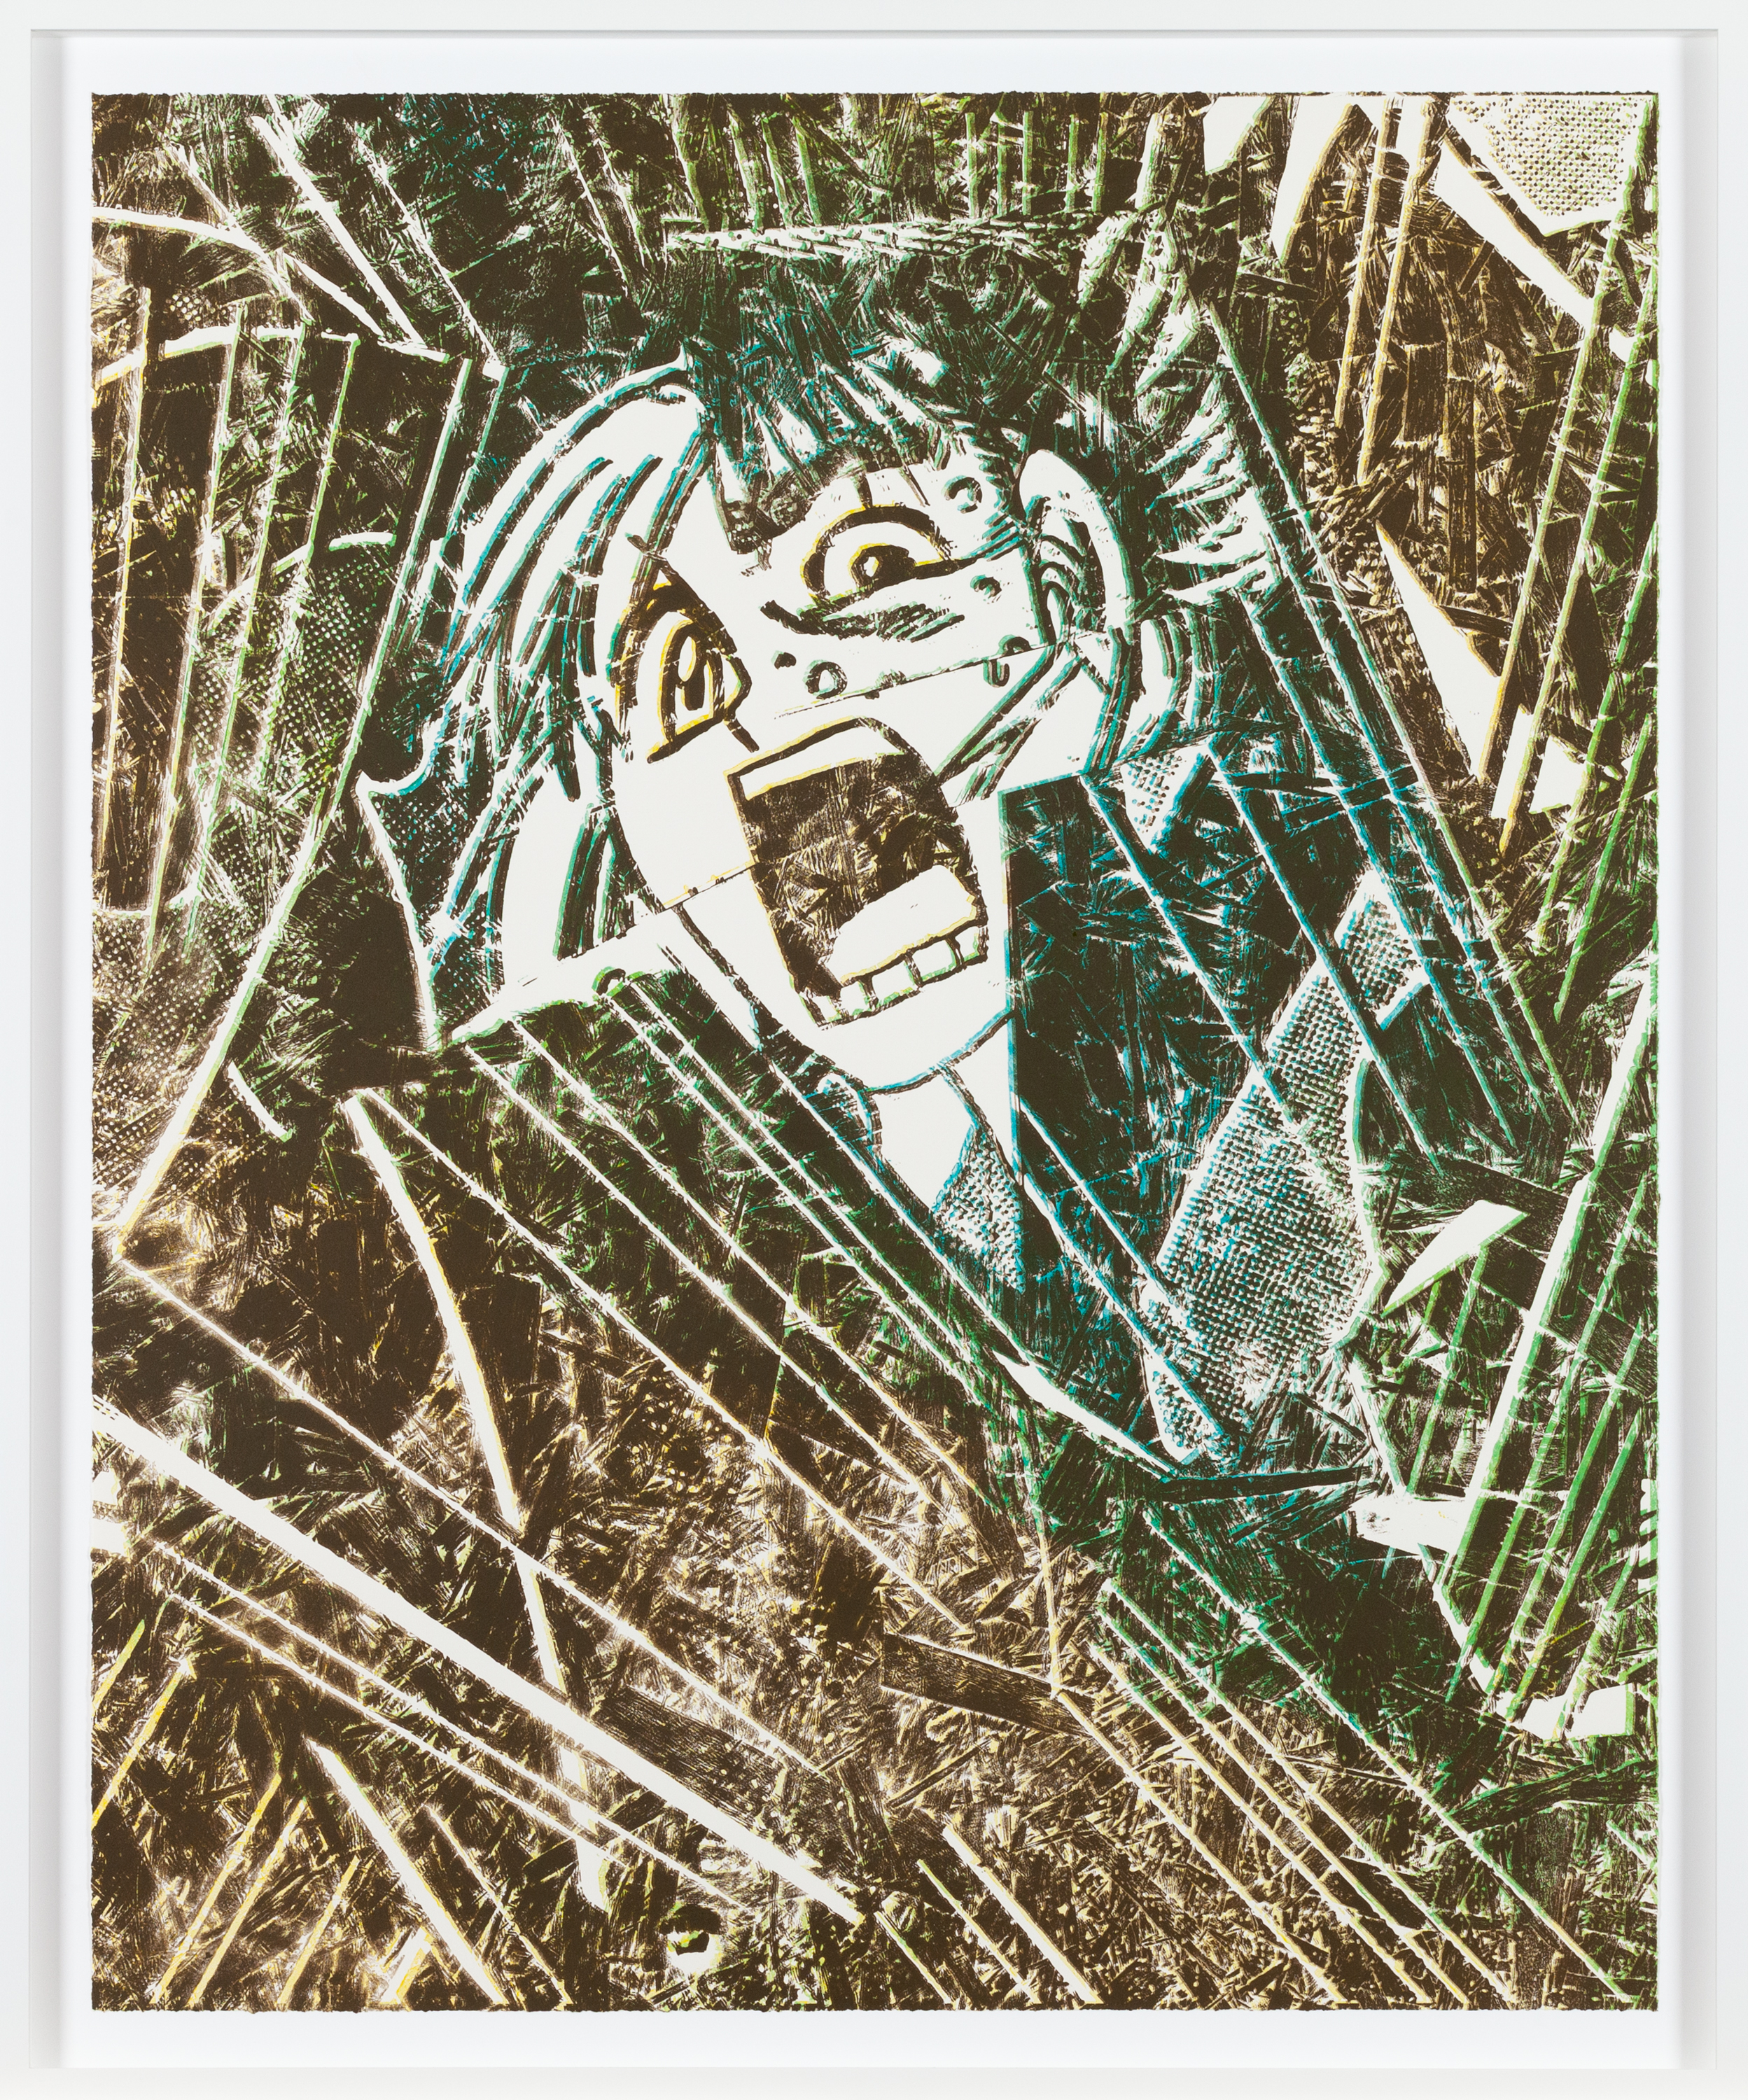 Color image of a color woodcut print depicting a figure in distress with mouth wide open framed in white